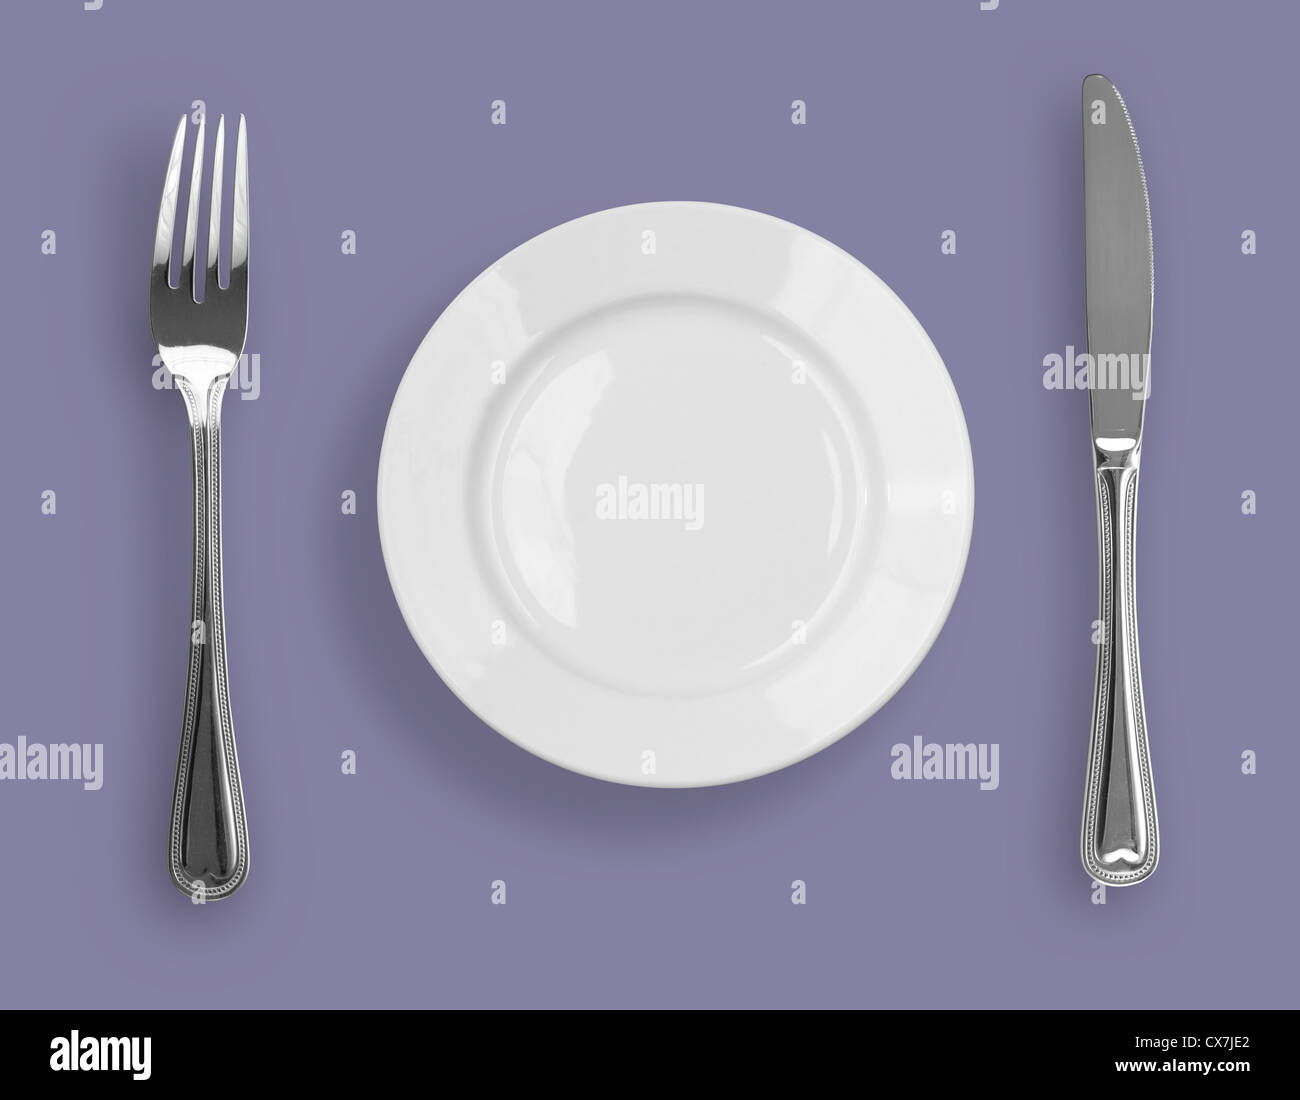 Knife, plate and fork on violet background Stock Photo